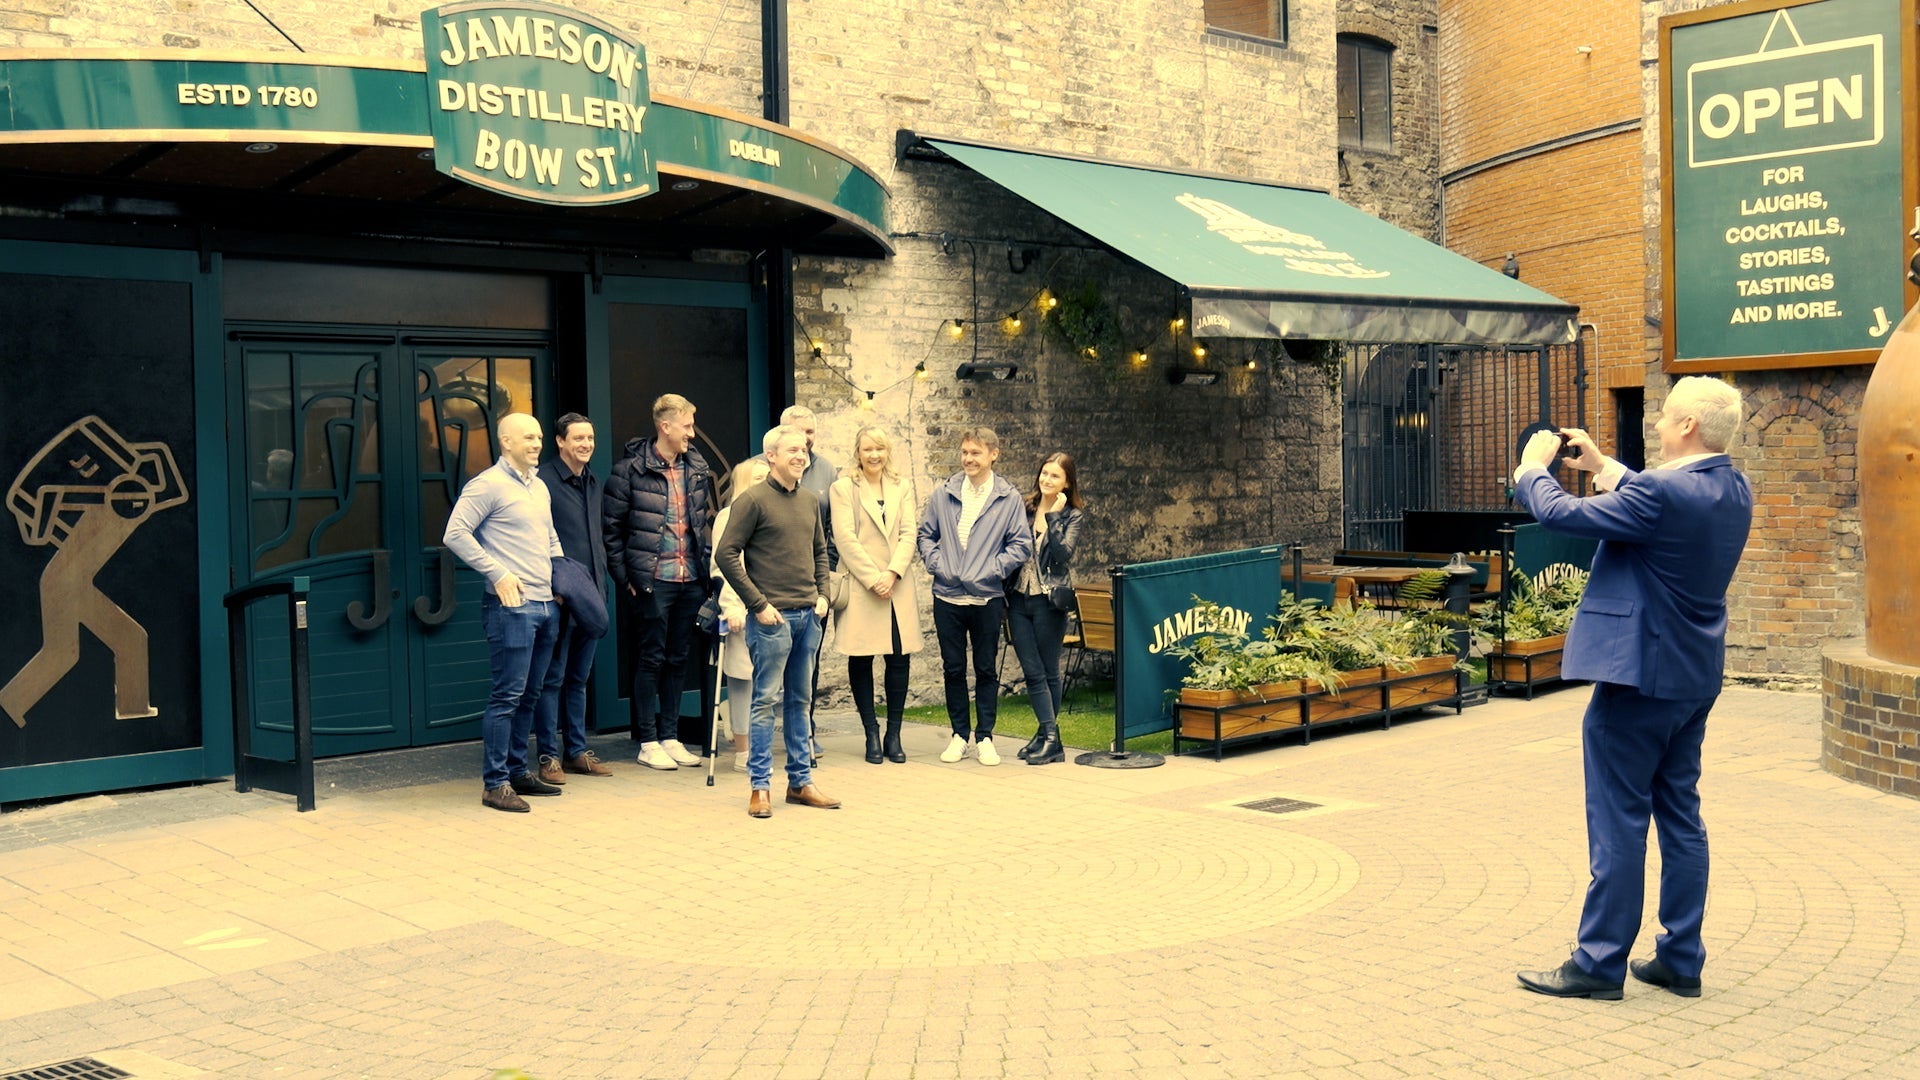 A guide takes a picture of a group of people outside the Jameson Bow Street Distillery in Dublin